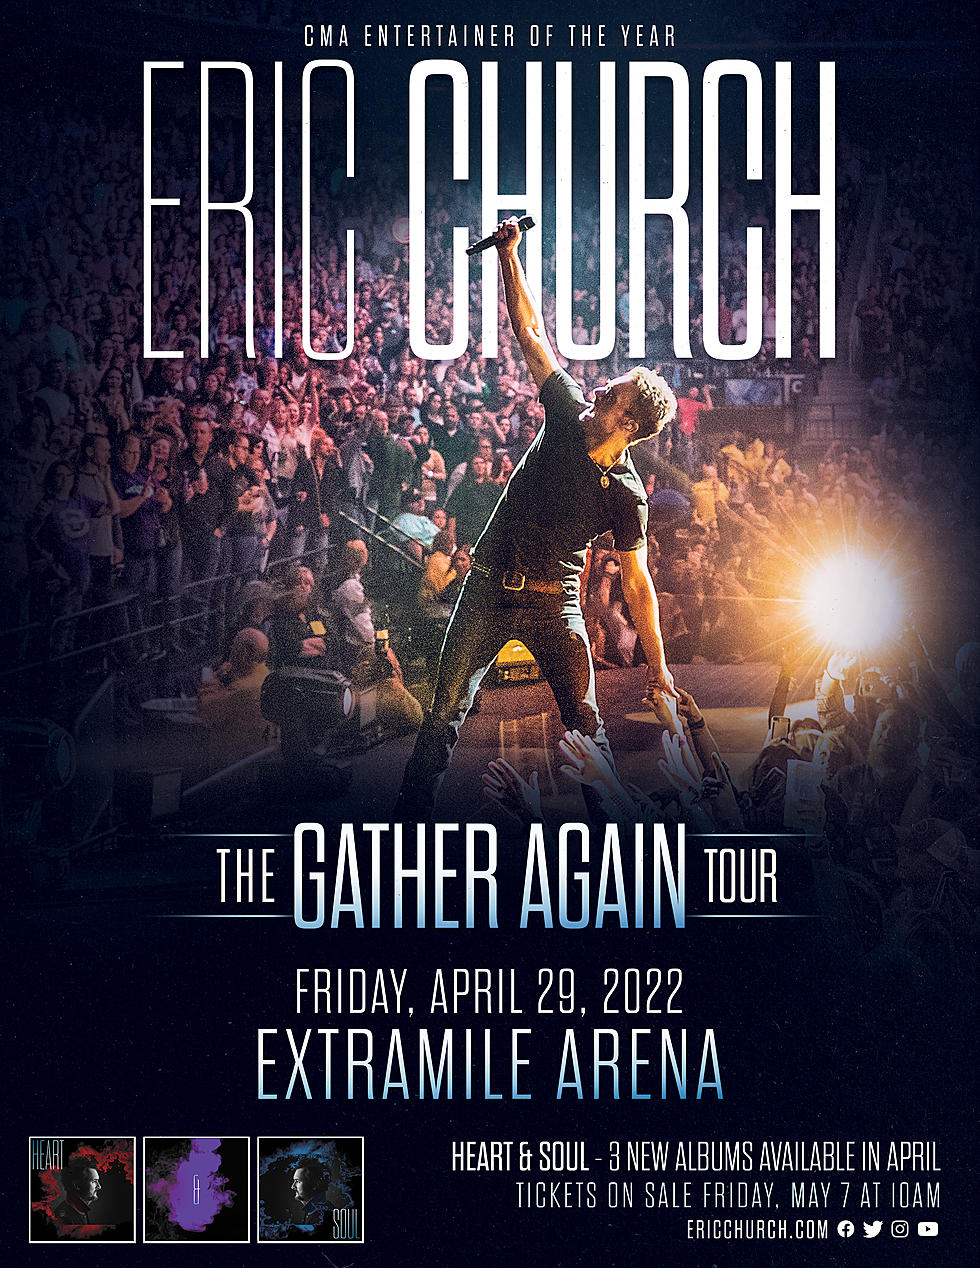 Eric Church Coming Back to ExtraMile Arena!!!!